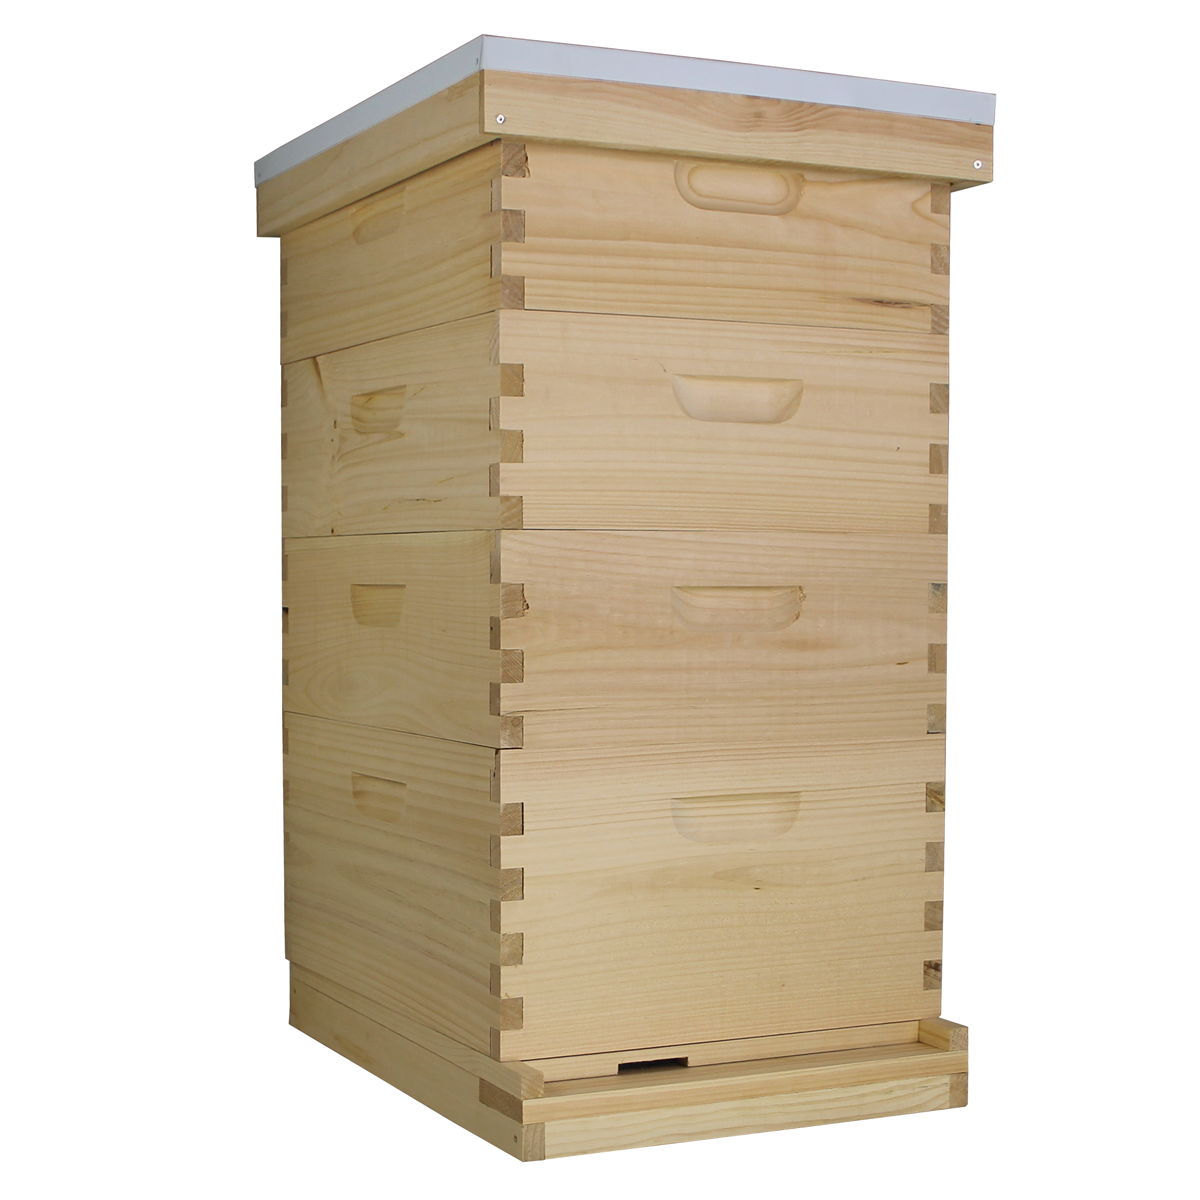 Busy Bees 'N' More Amish Made 10 Frame Beehive With 1 Deep Bee Box & 3 Medium Bee Boxes